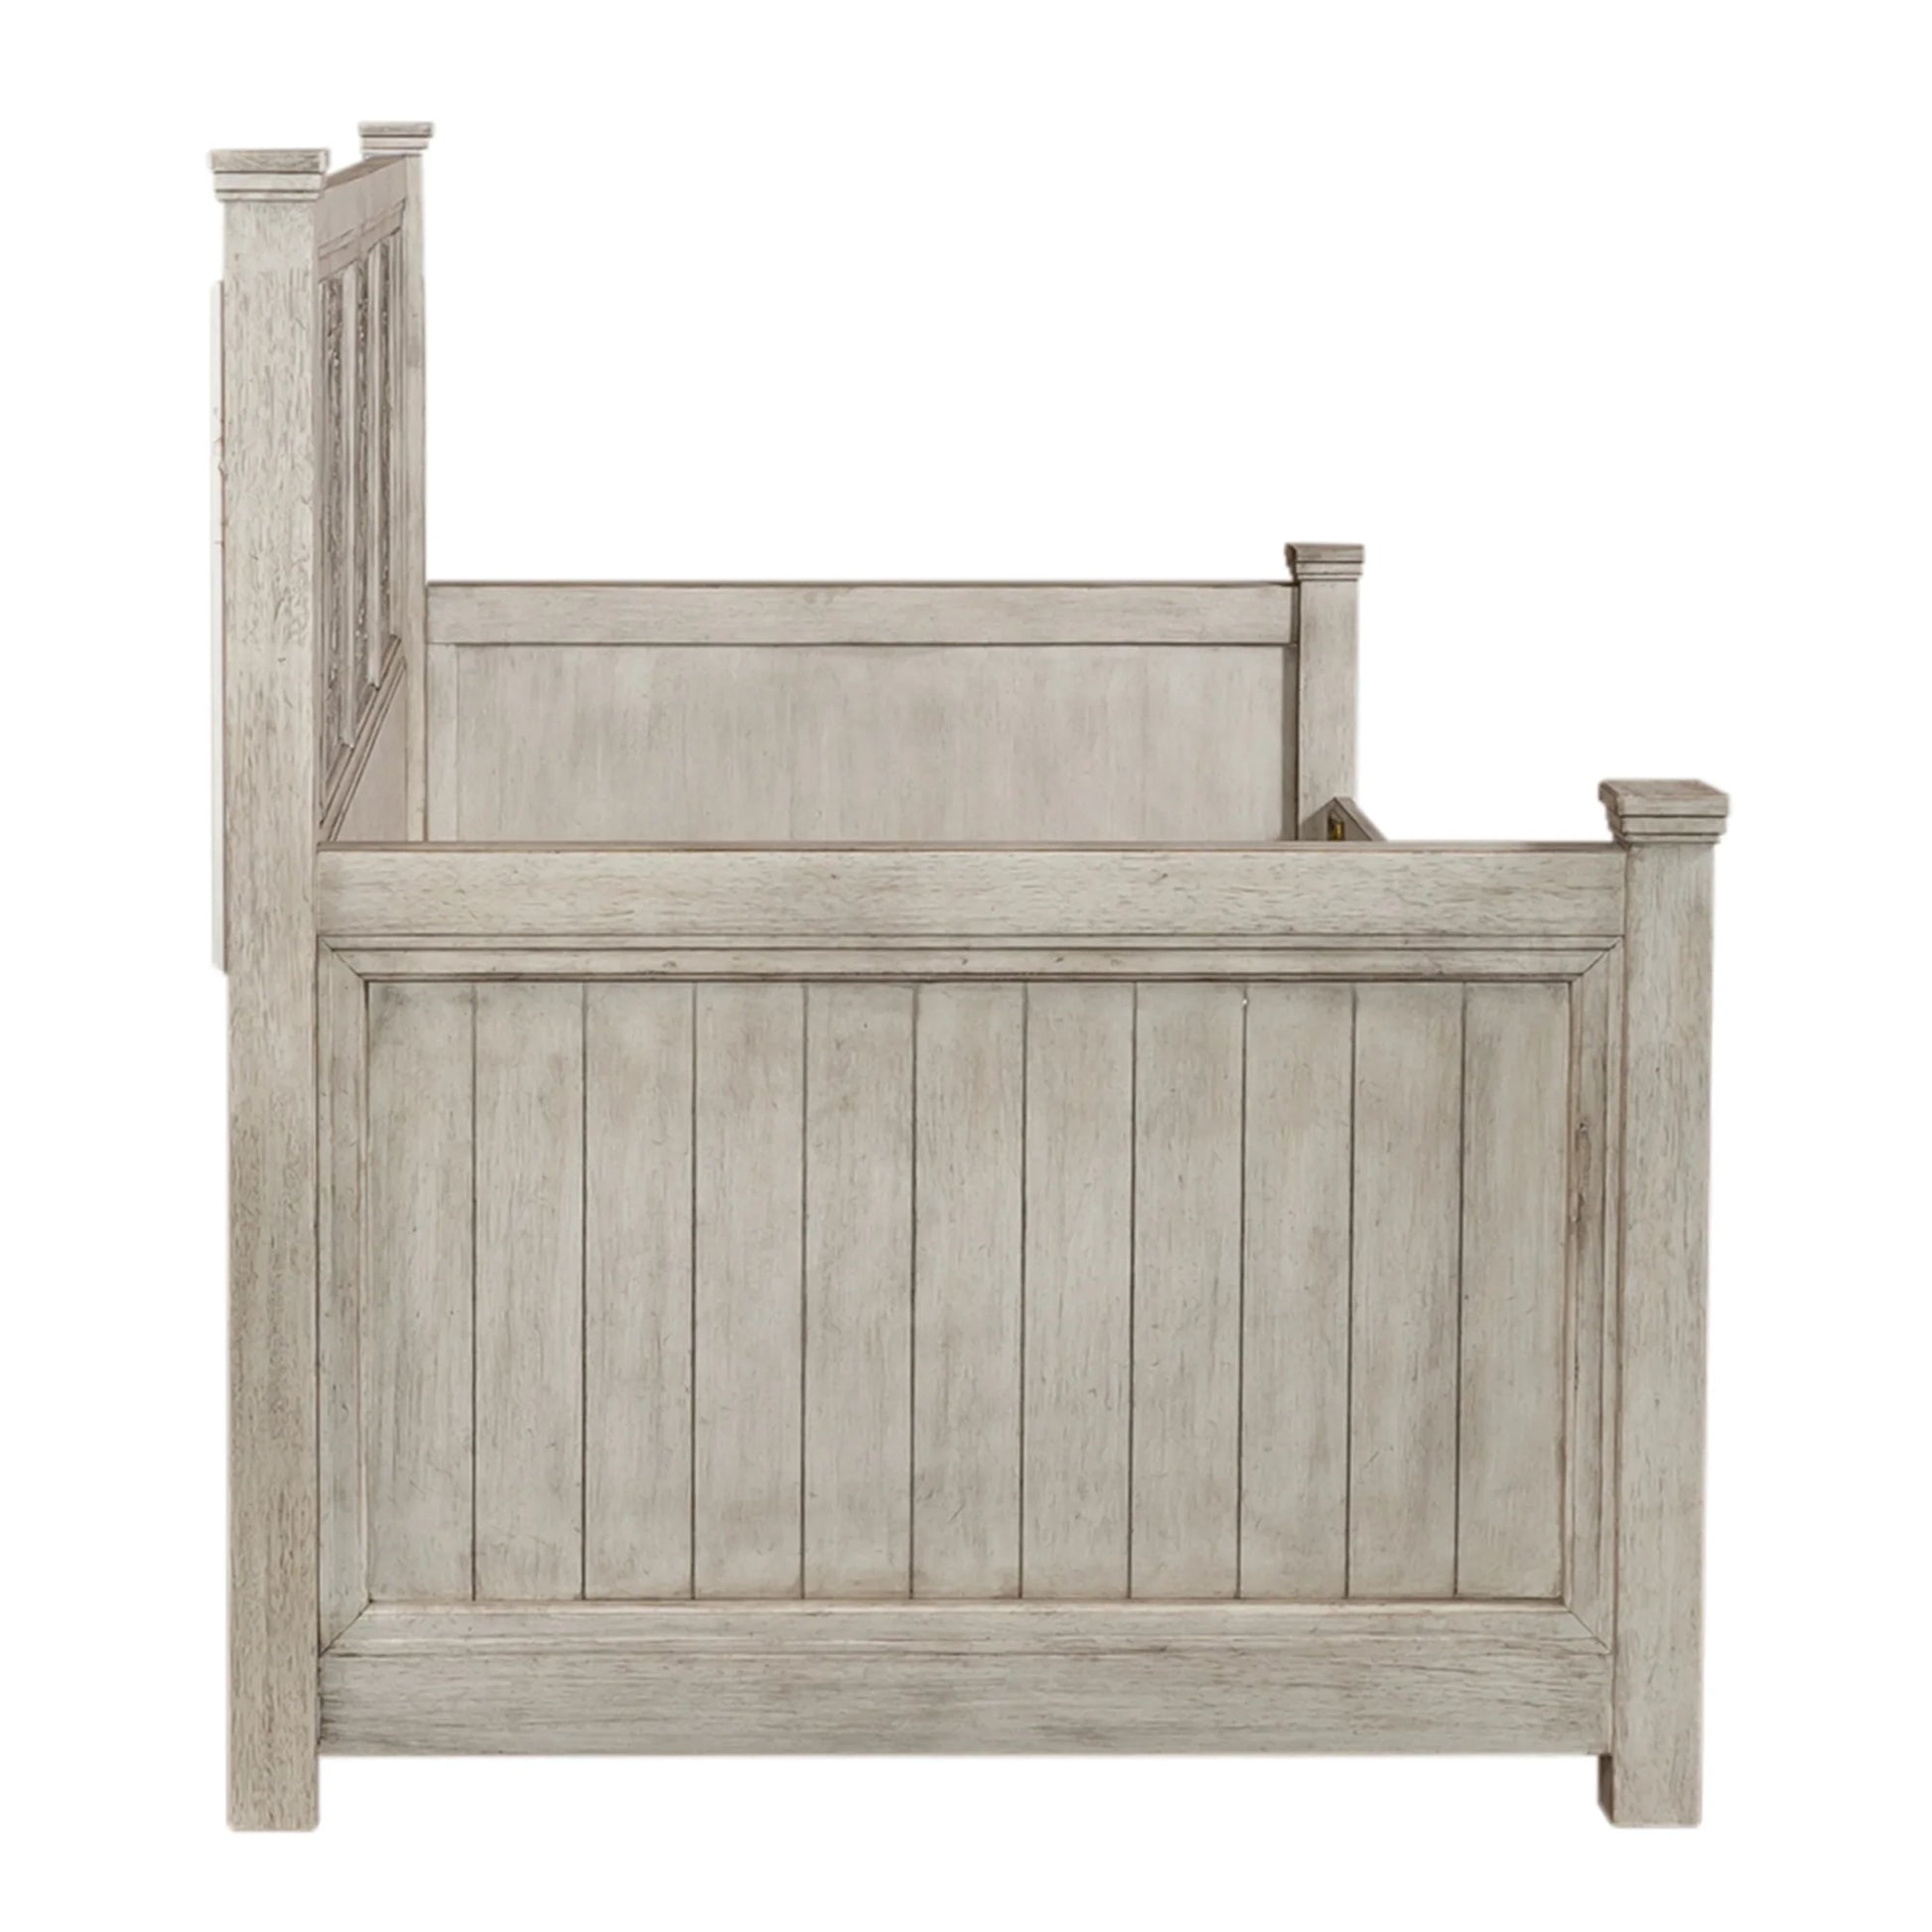 Heartland - Daybed Decorative Back - White 3